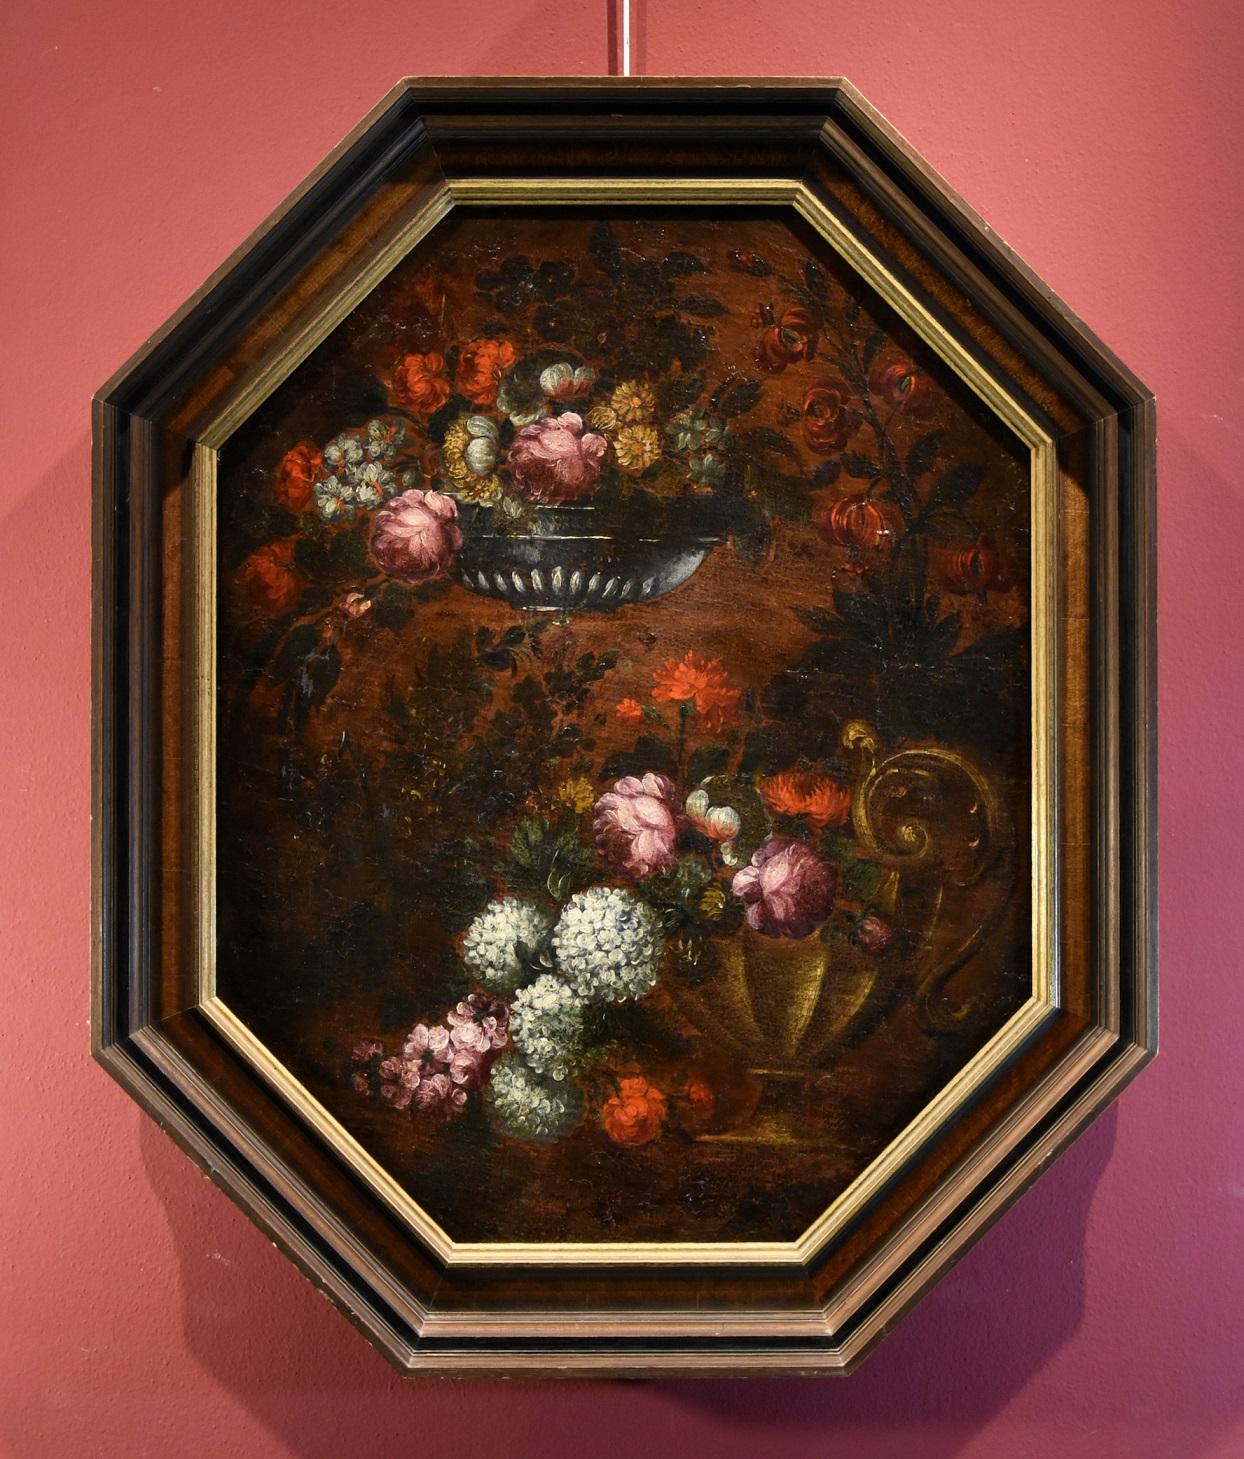 Still-life Flower Paint Oil on canvas Old master 17th Century Lombard school - Painting by Unknown